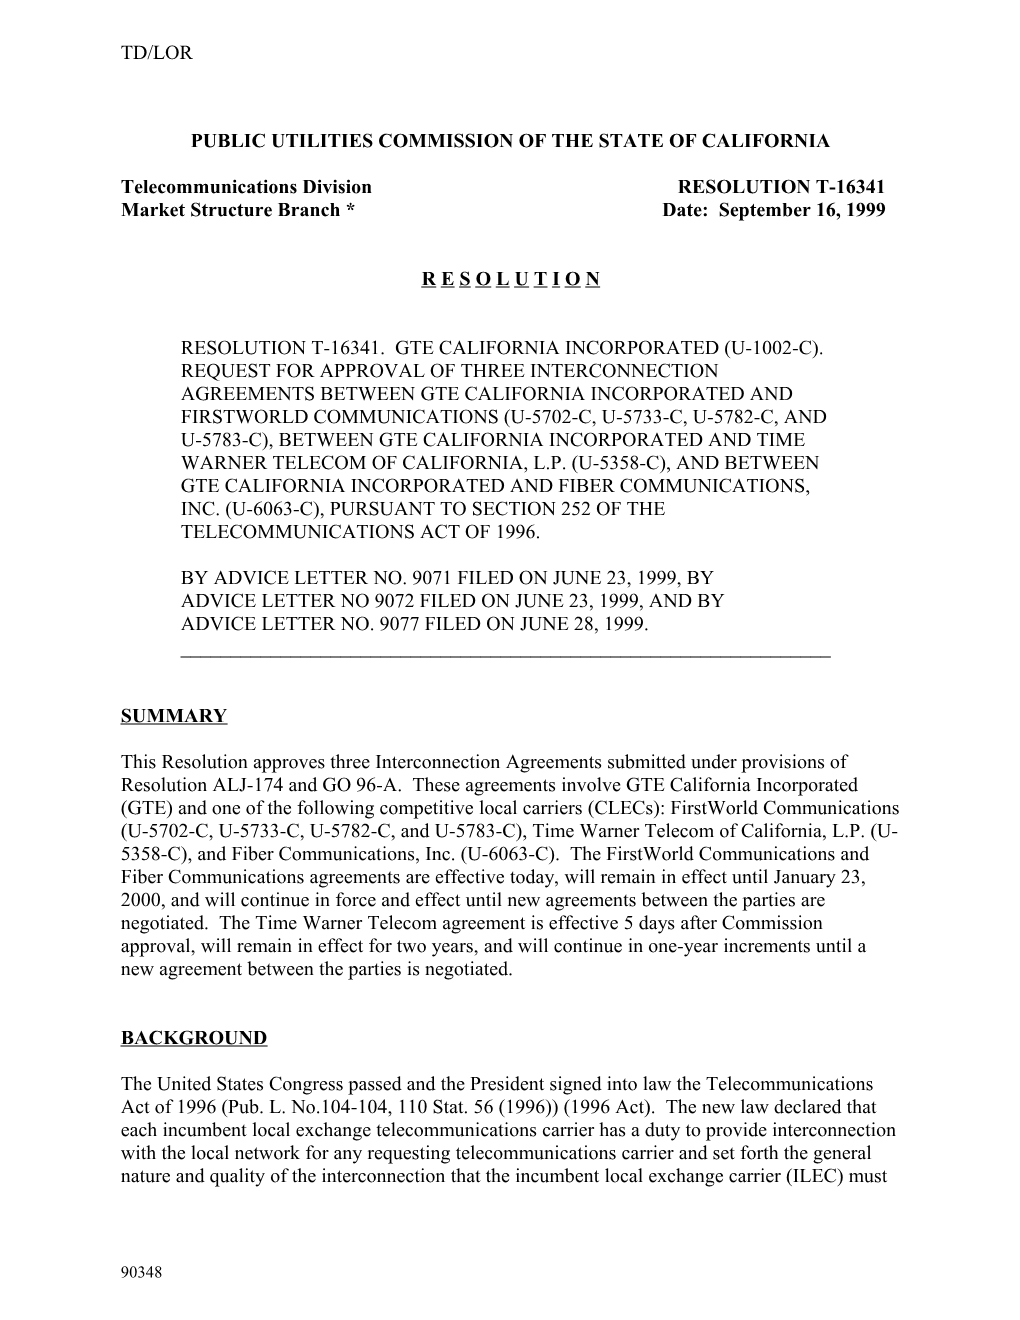 Public Utilities Commission of the State of California s103